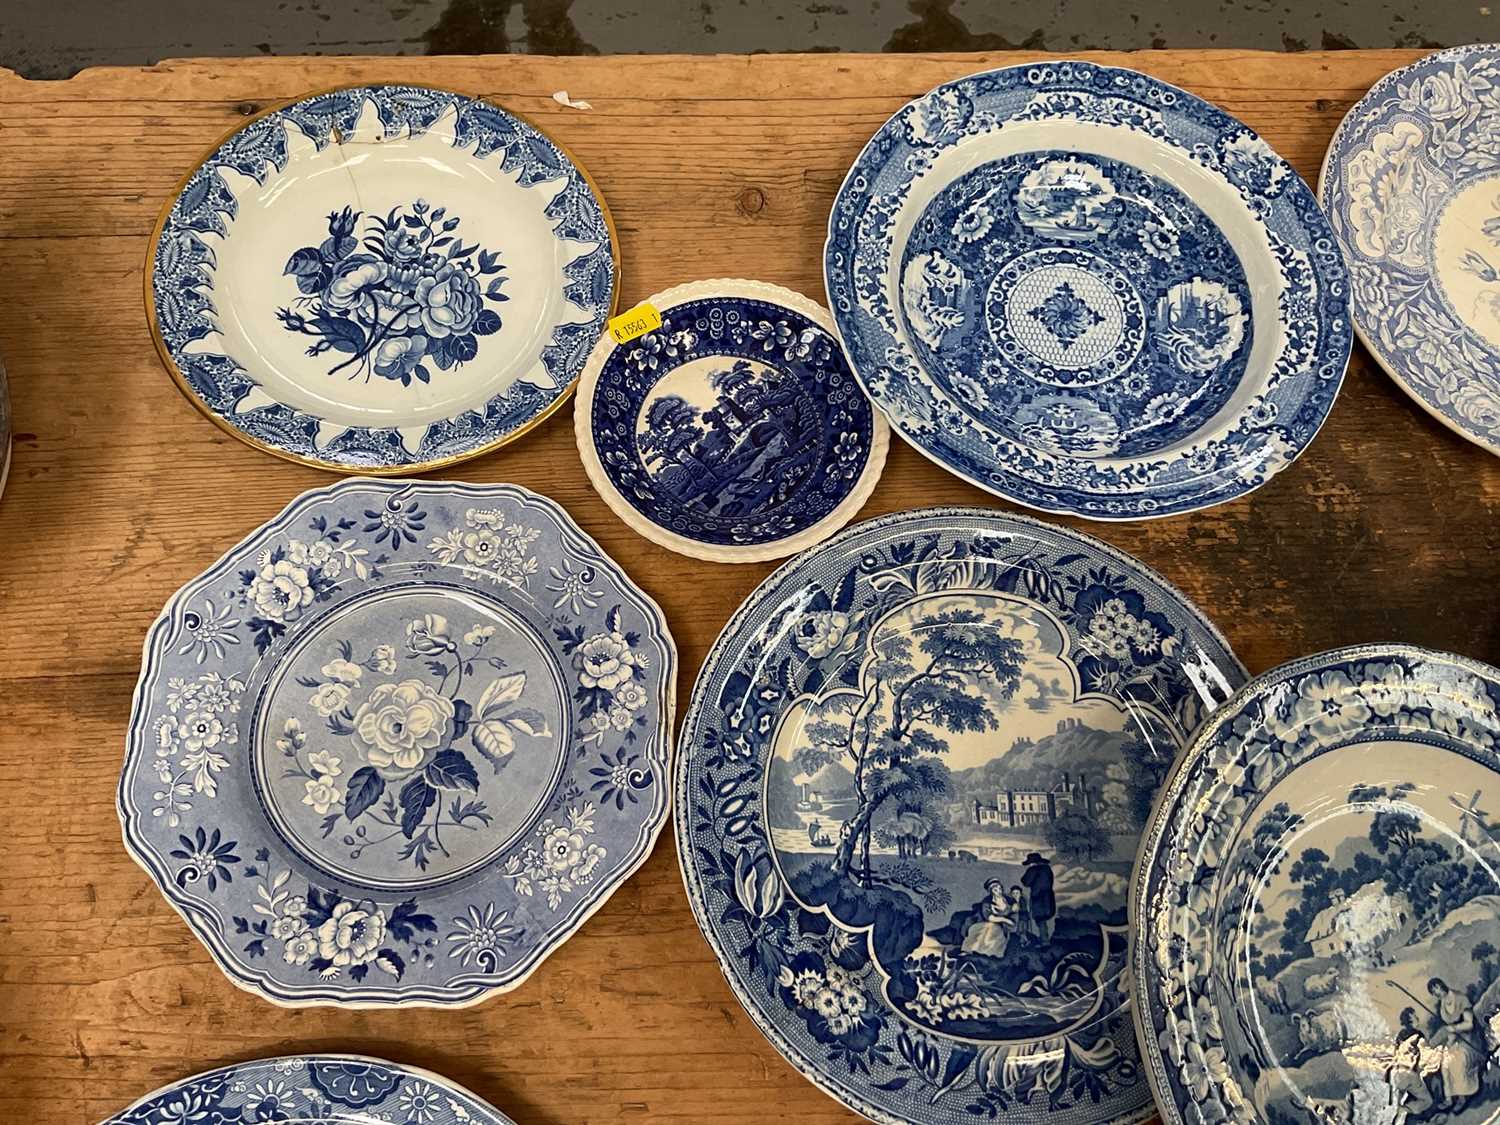 Group of 19th century blue and white transfer printed china - Image 6 of 7